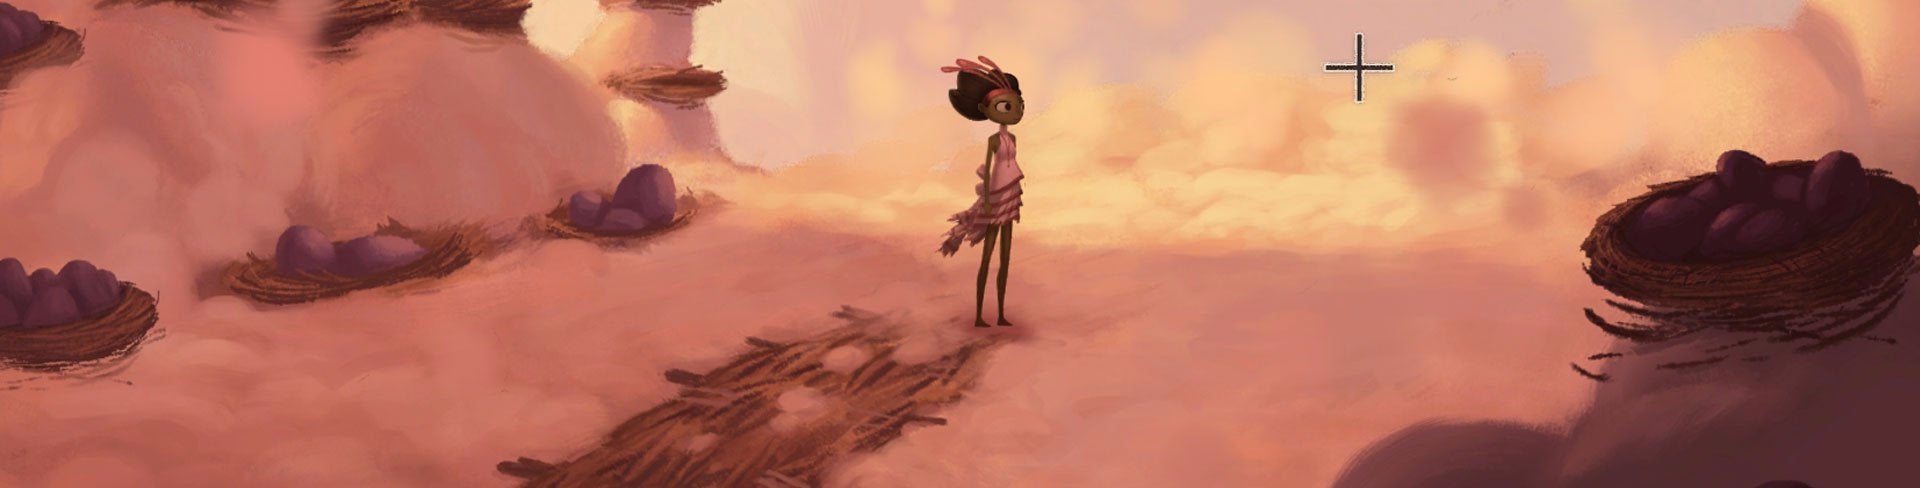 Image for Broken Age Act 2 review